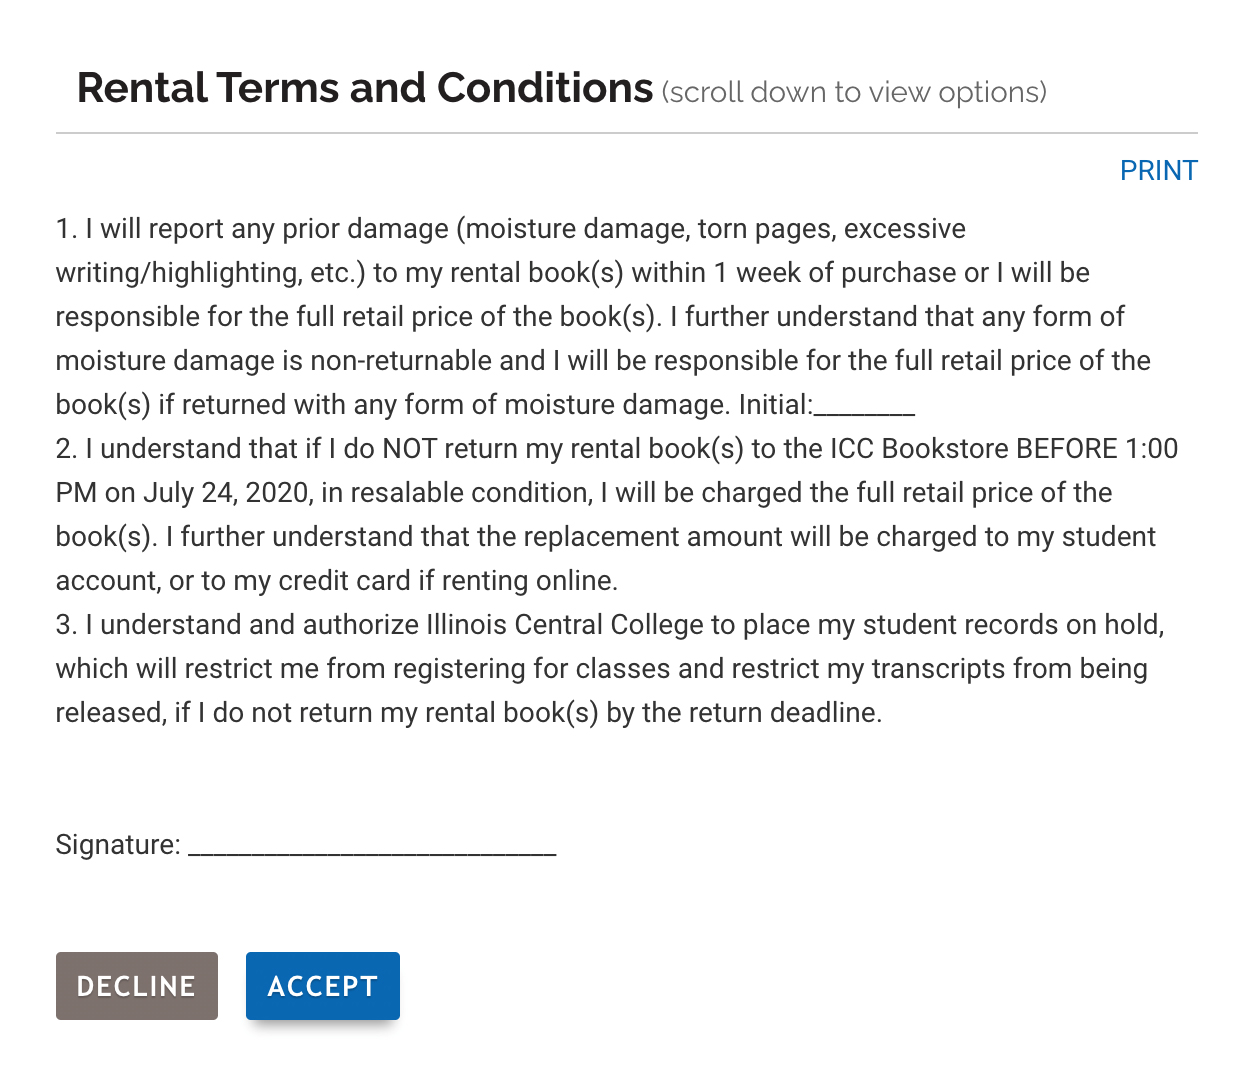 Rental Terms and Conditions